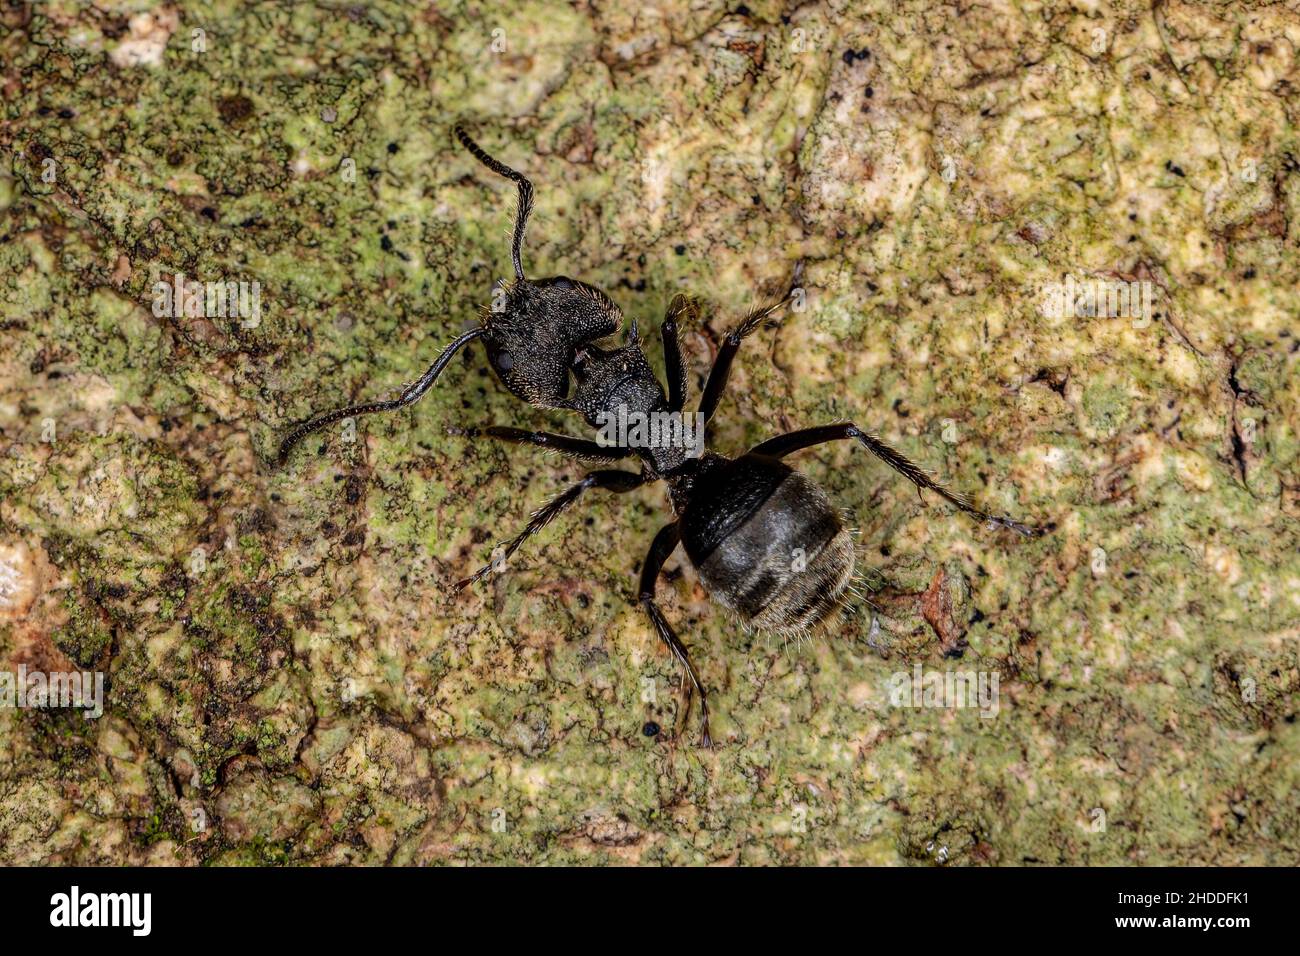 Adult Odorous Ant of the species Dolichoderus bispinosus Stock Photo